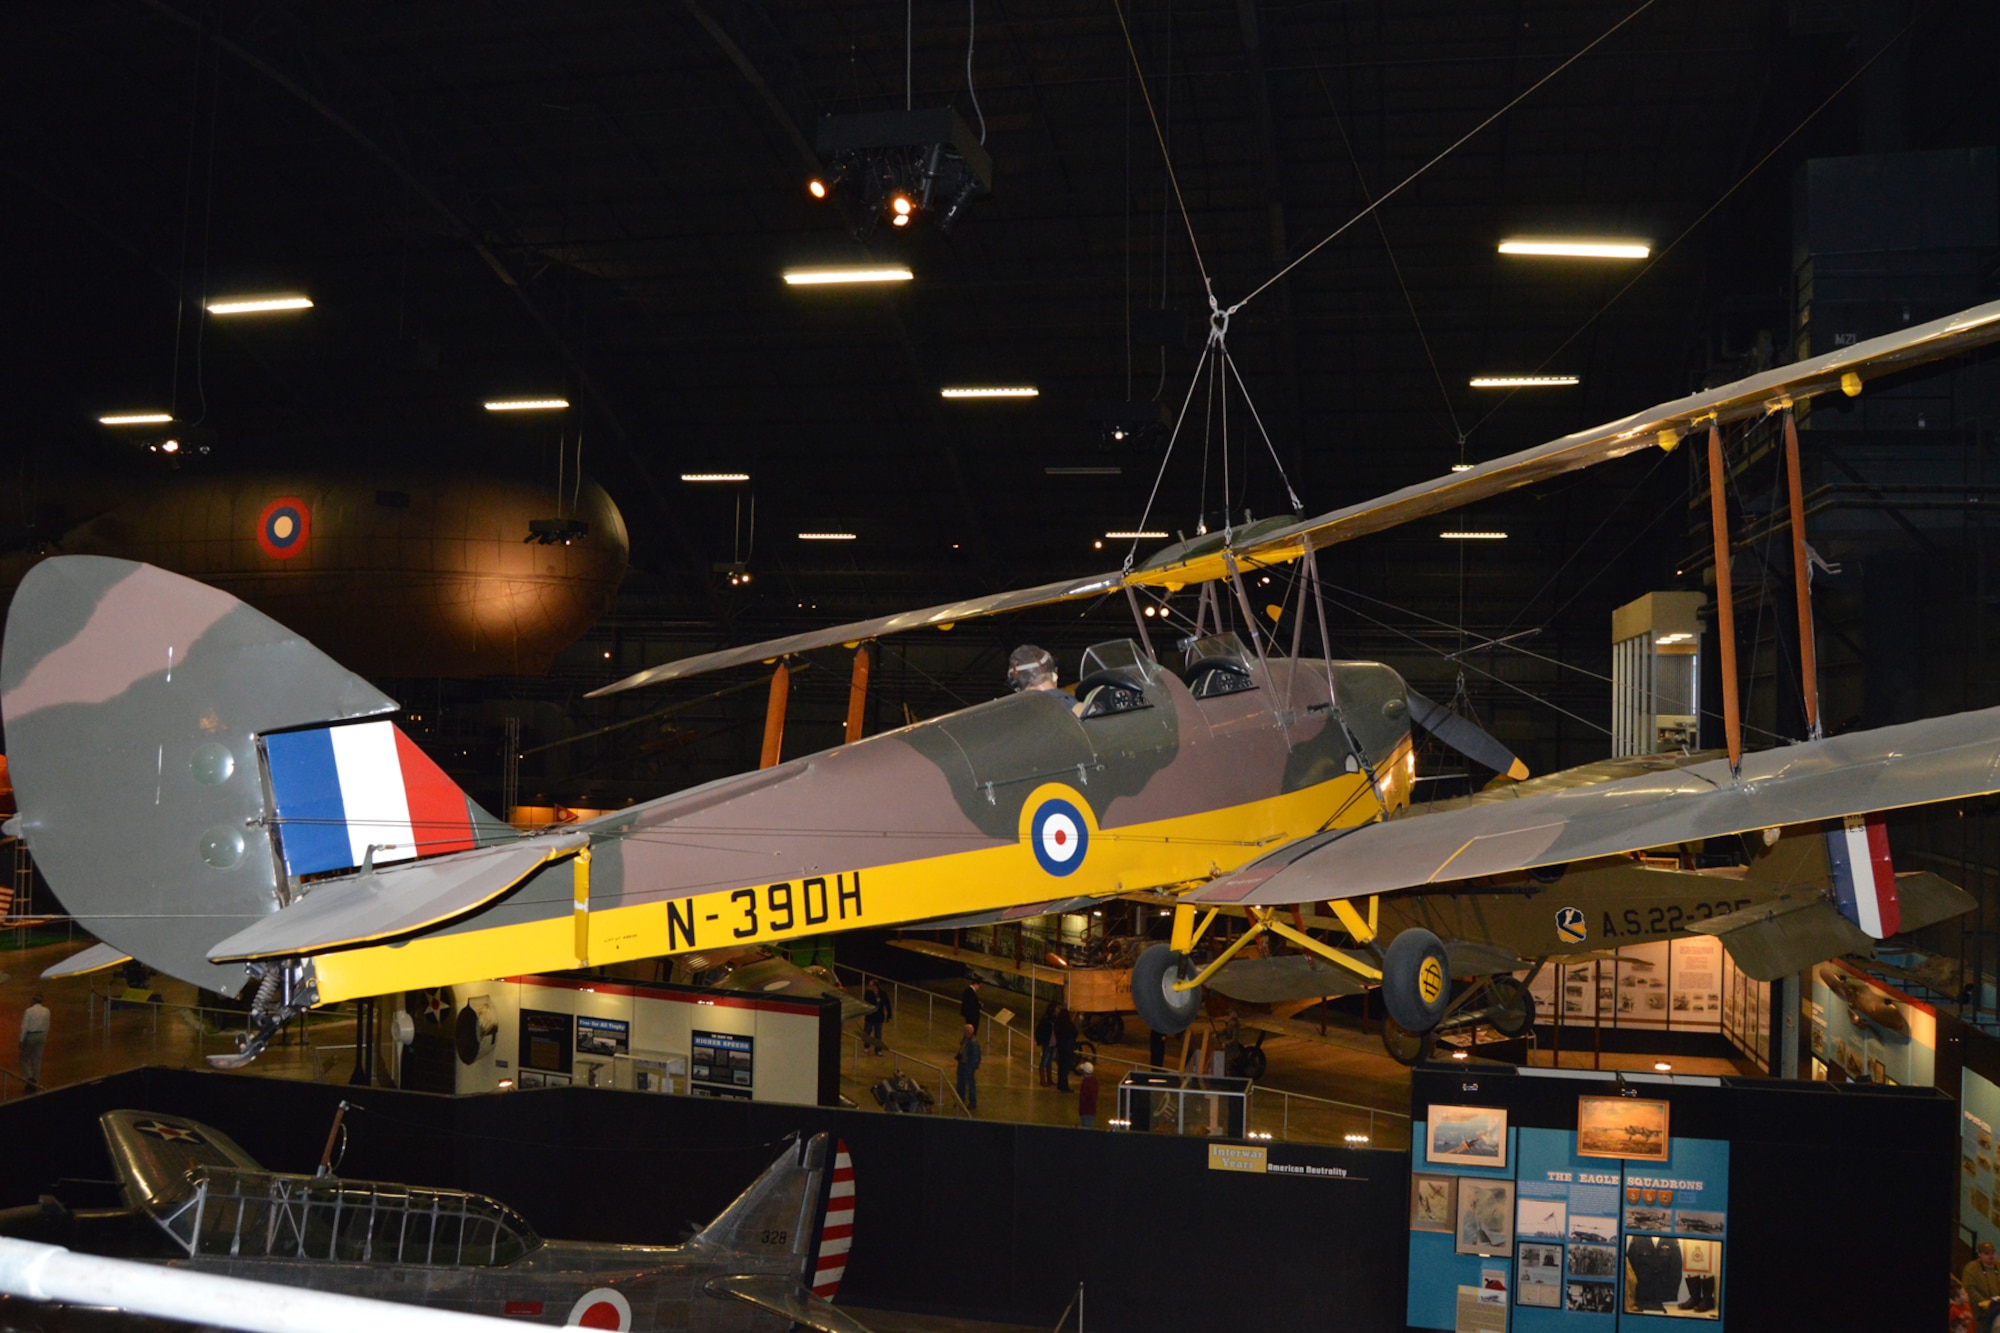 DAYTON, Ohio -- De Havilland DH 82A Tiger Moth in the Early Years Gallery at the National Museum of the United States Air Force. (U.S. Air Force photo)